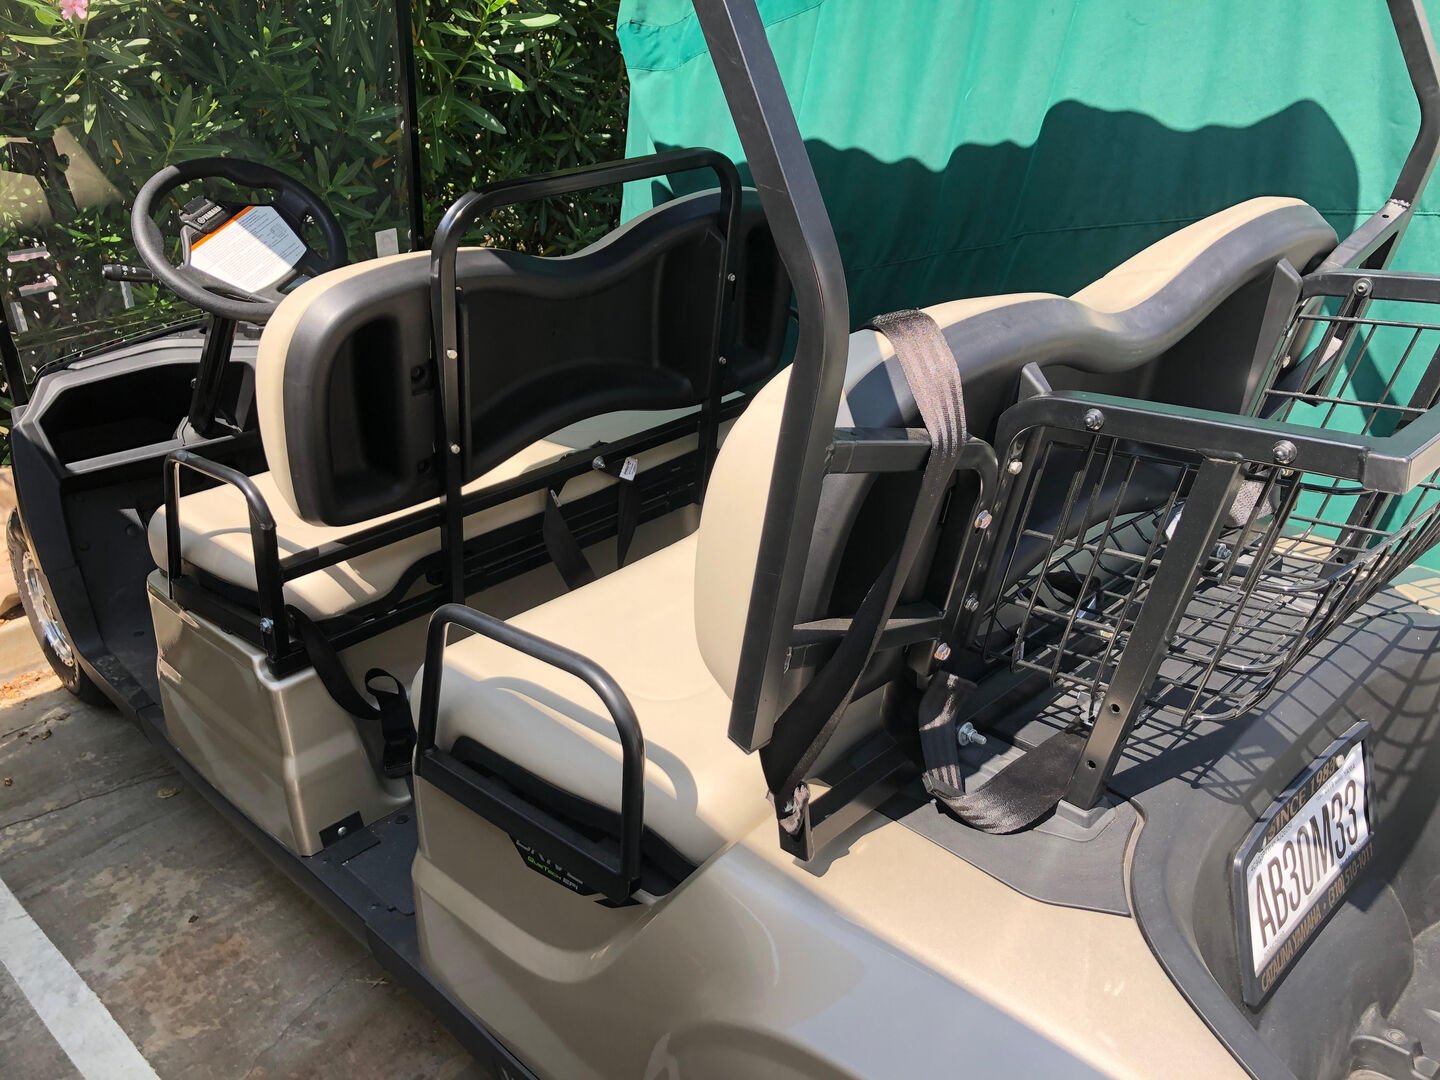 We provide a golf cart for your stay to explore Avalon